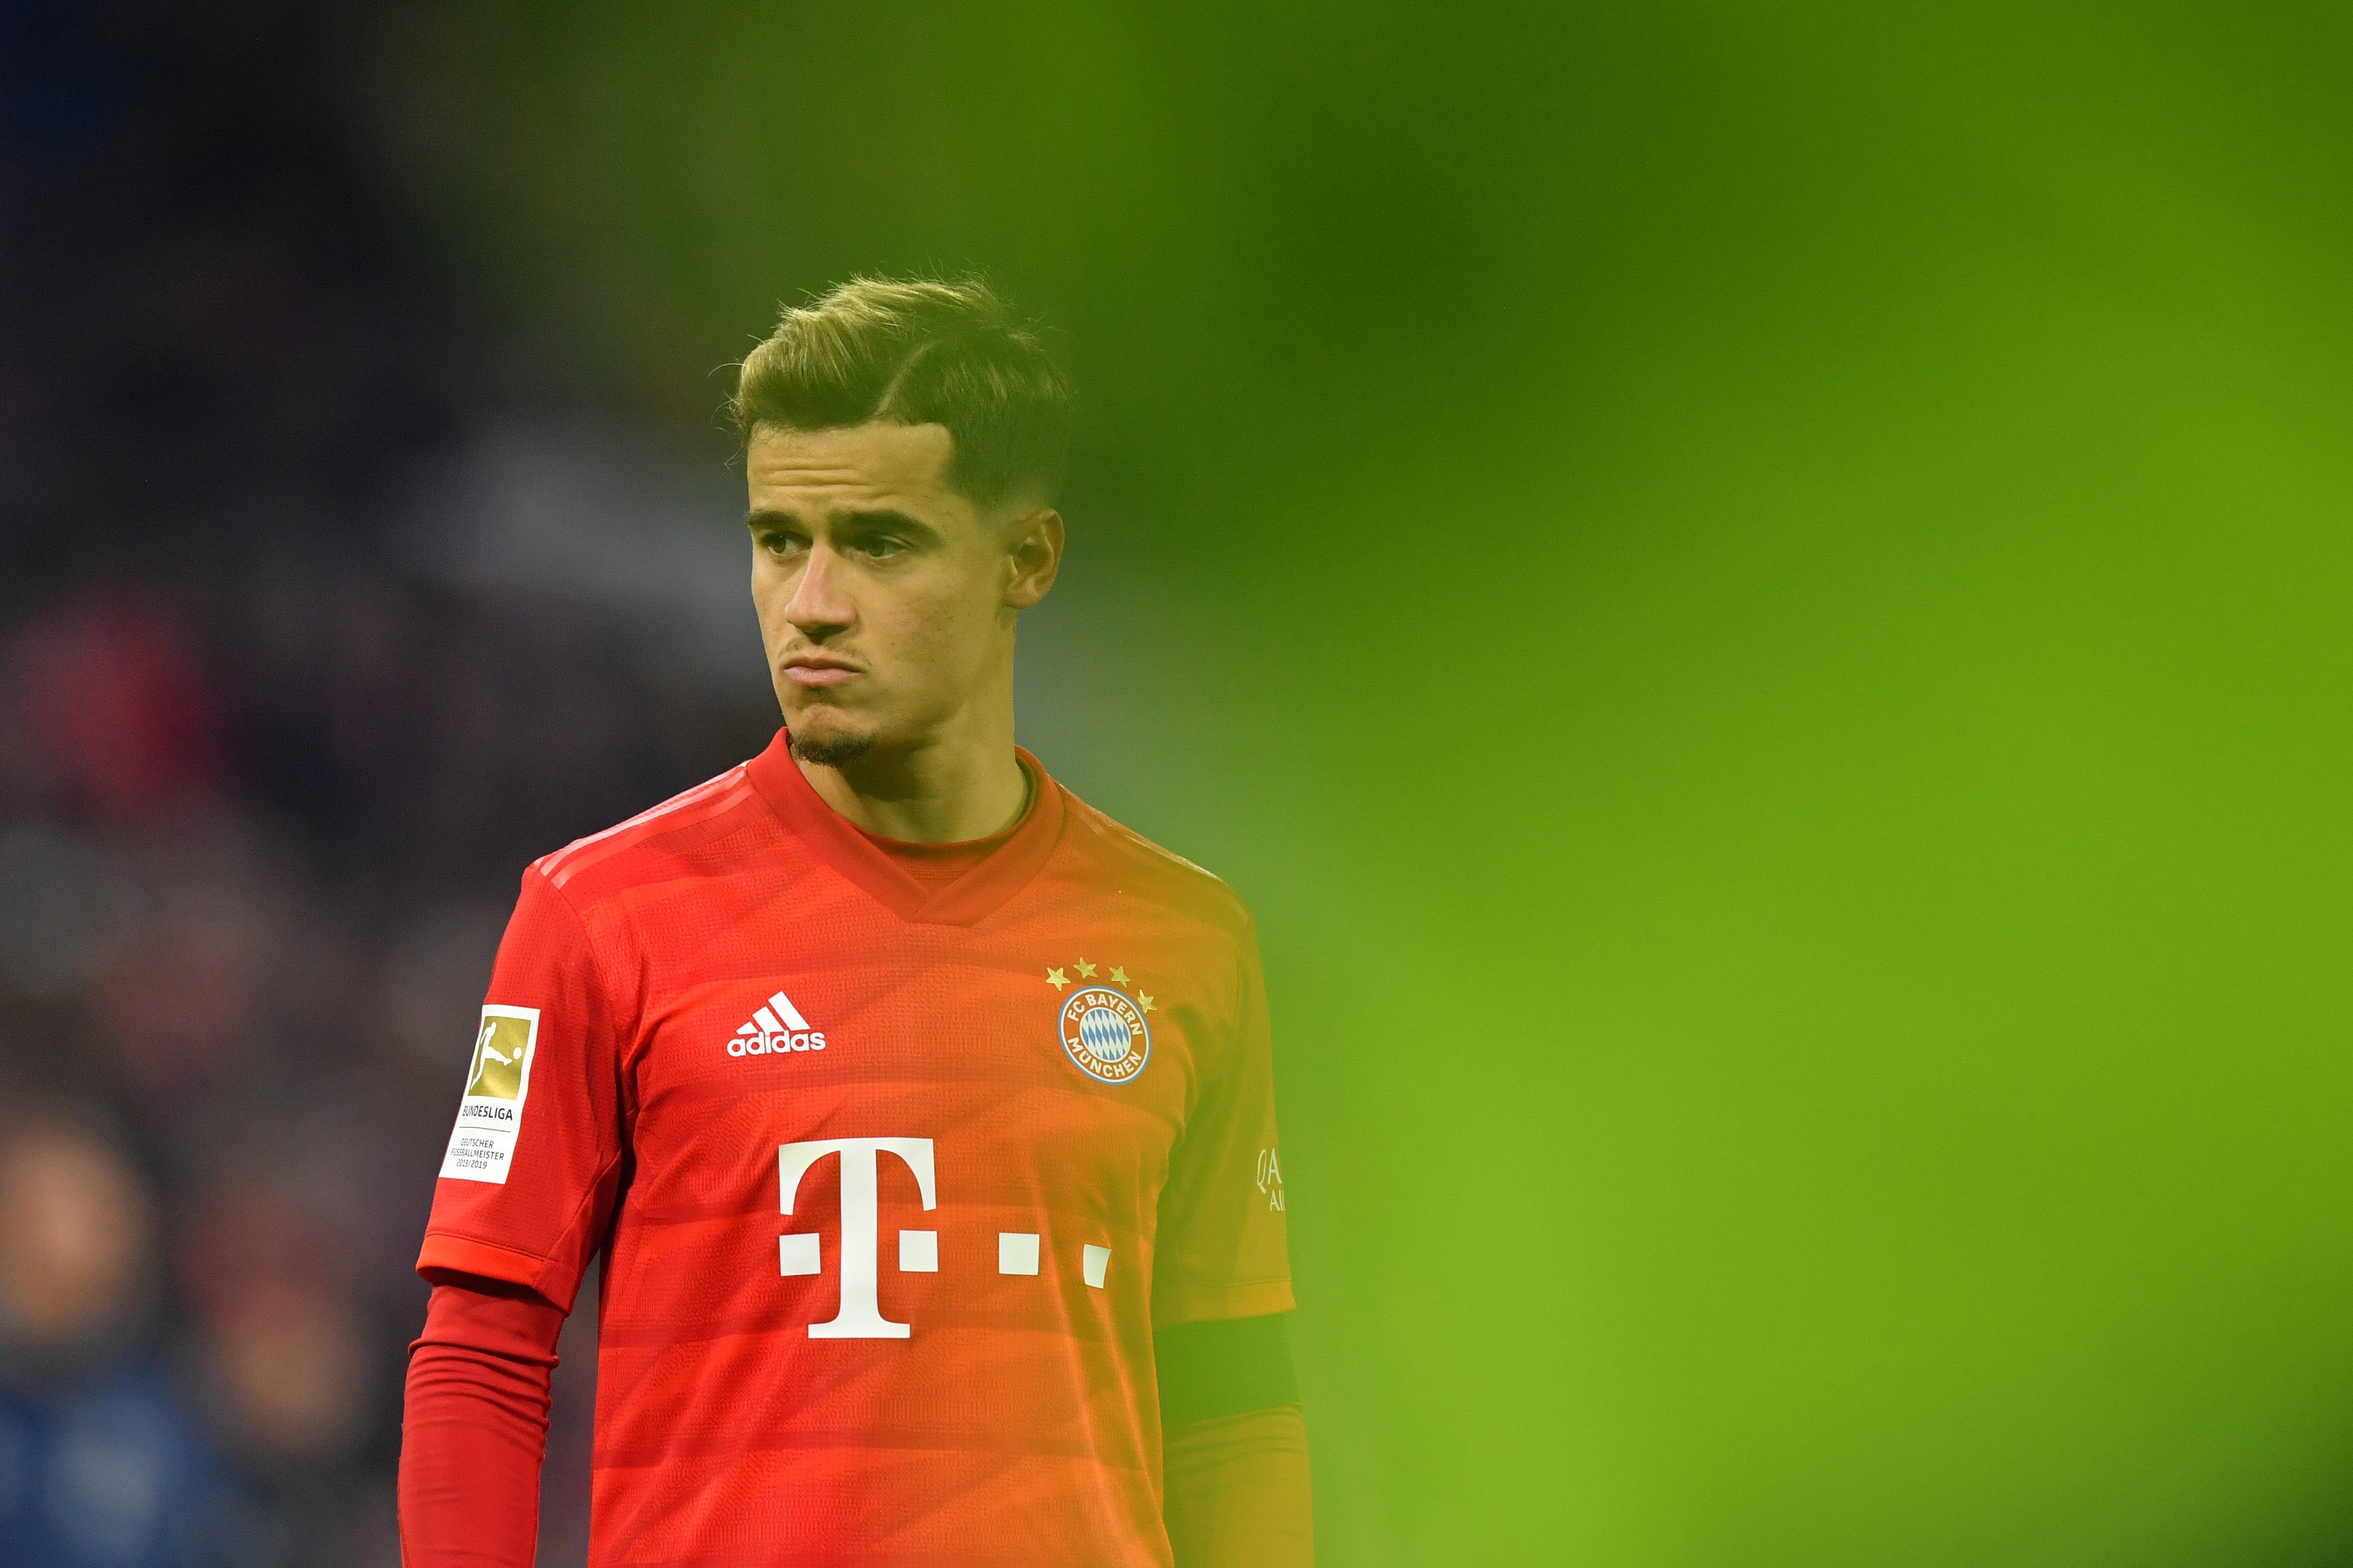 Philippe Coutinho collected plenty of silverware at Bayern but failed to shine individually